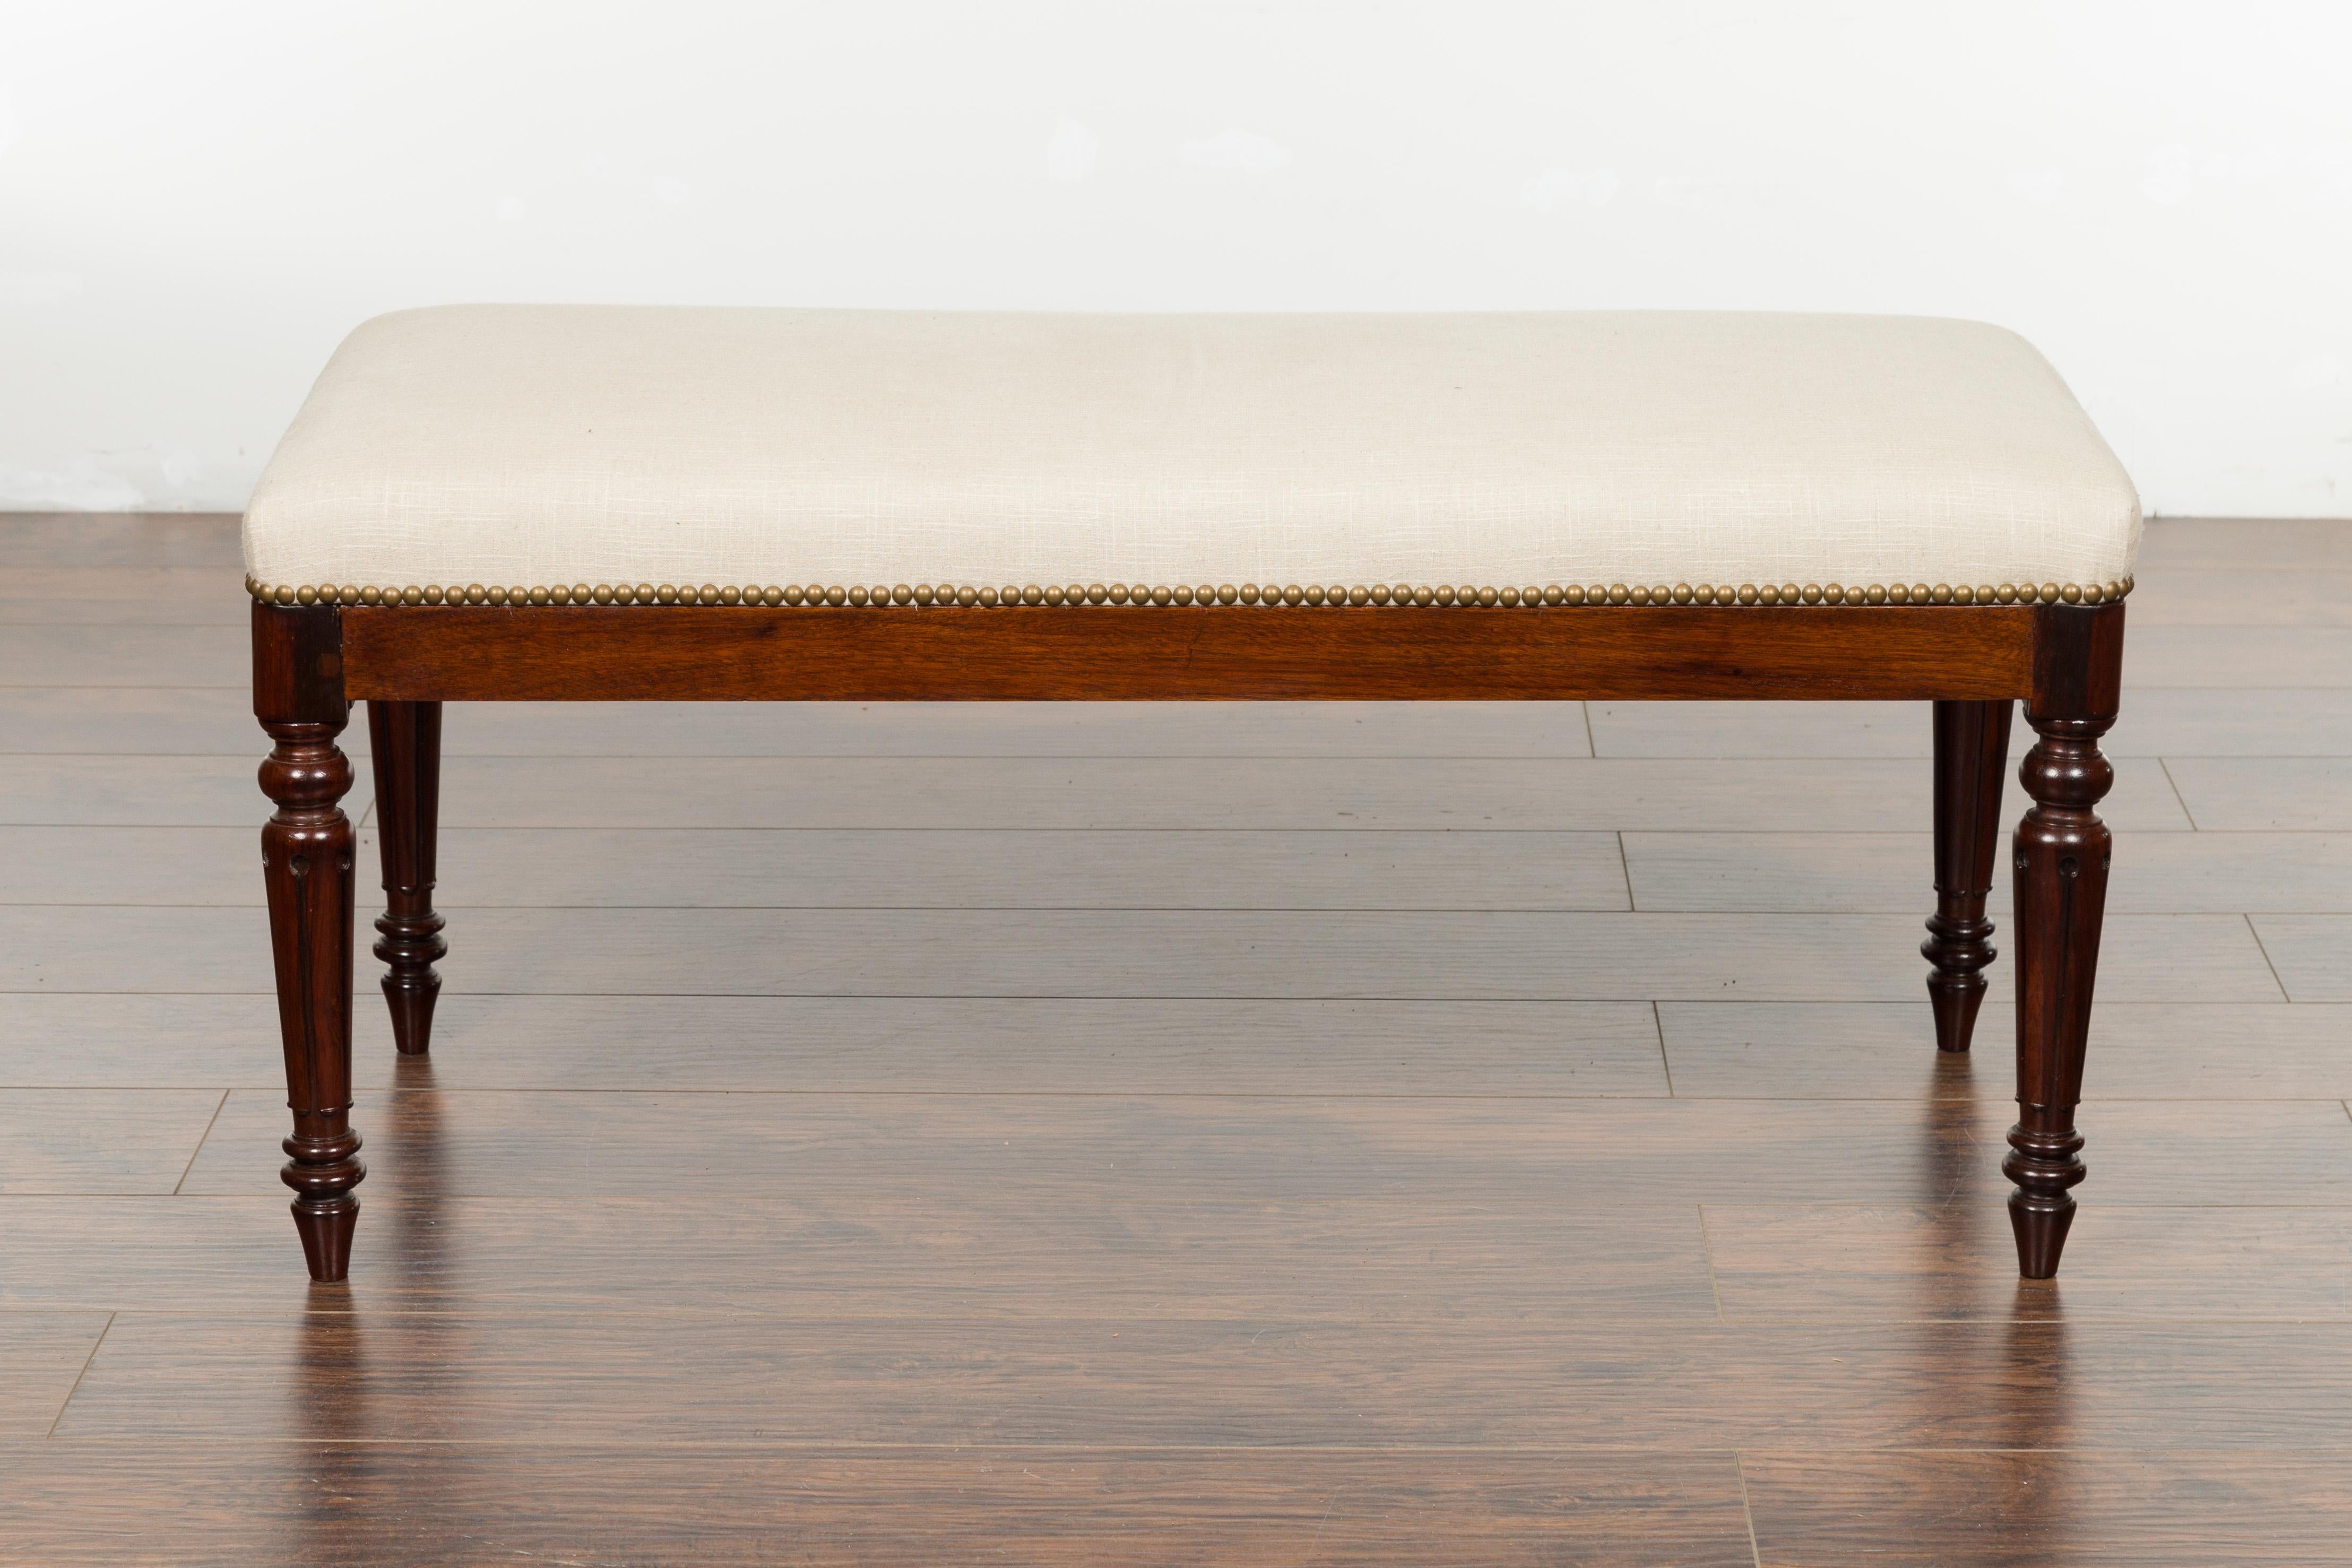 19th Century English 1820s Georgian Period Rosewood Bench with Turned Legs and New Upholstery